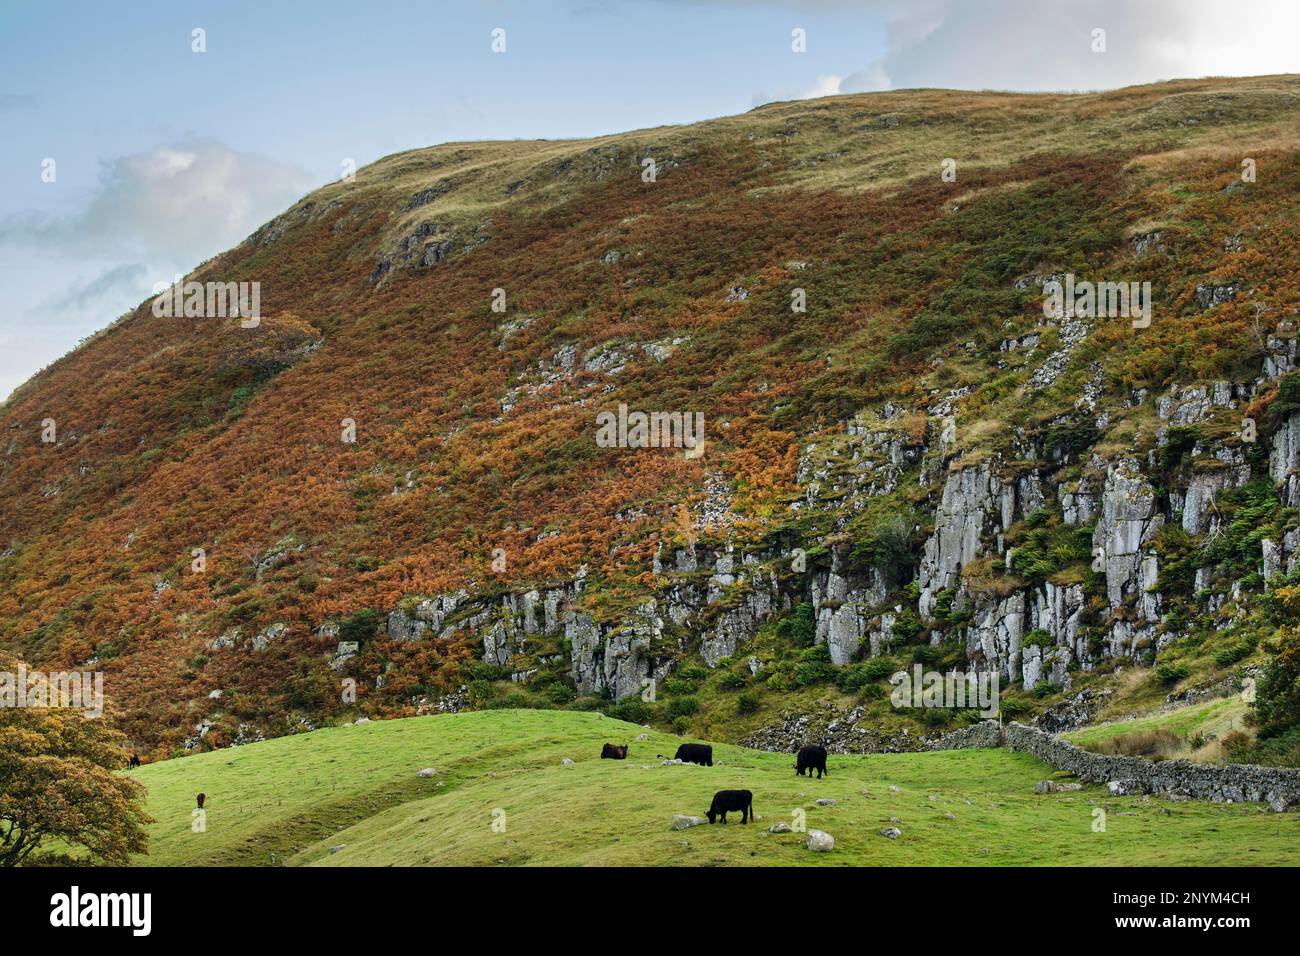 Black beef cattle graze below dolerite cliffs of Holwick Scars Upper Teesdale, County Durham, part of the Whin Sill, with bracken, ferns and juniper Stock Photo